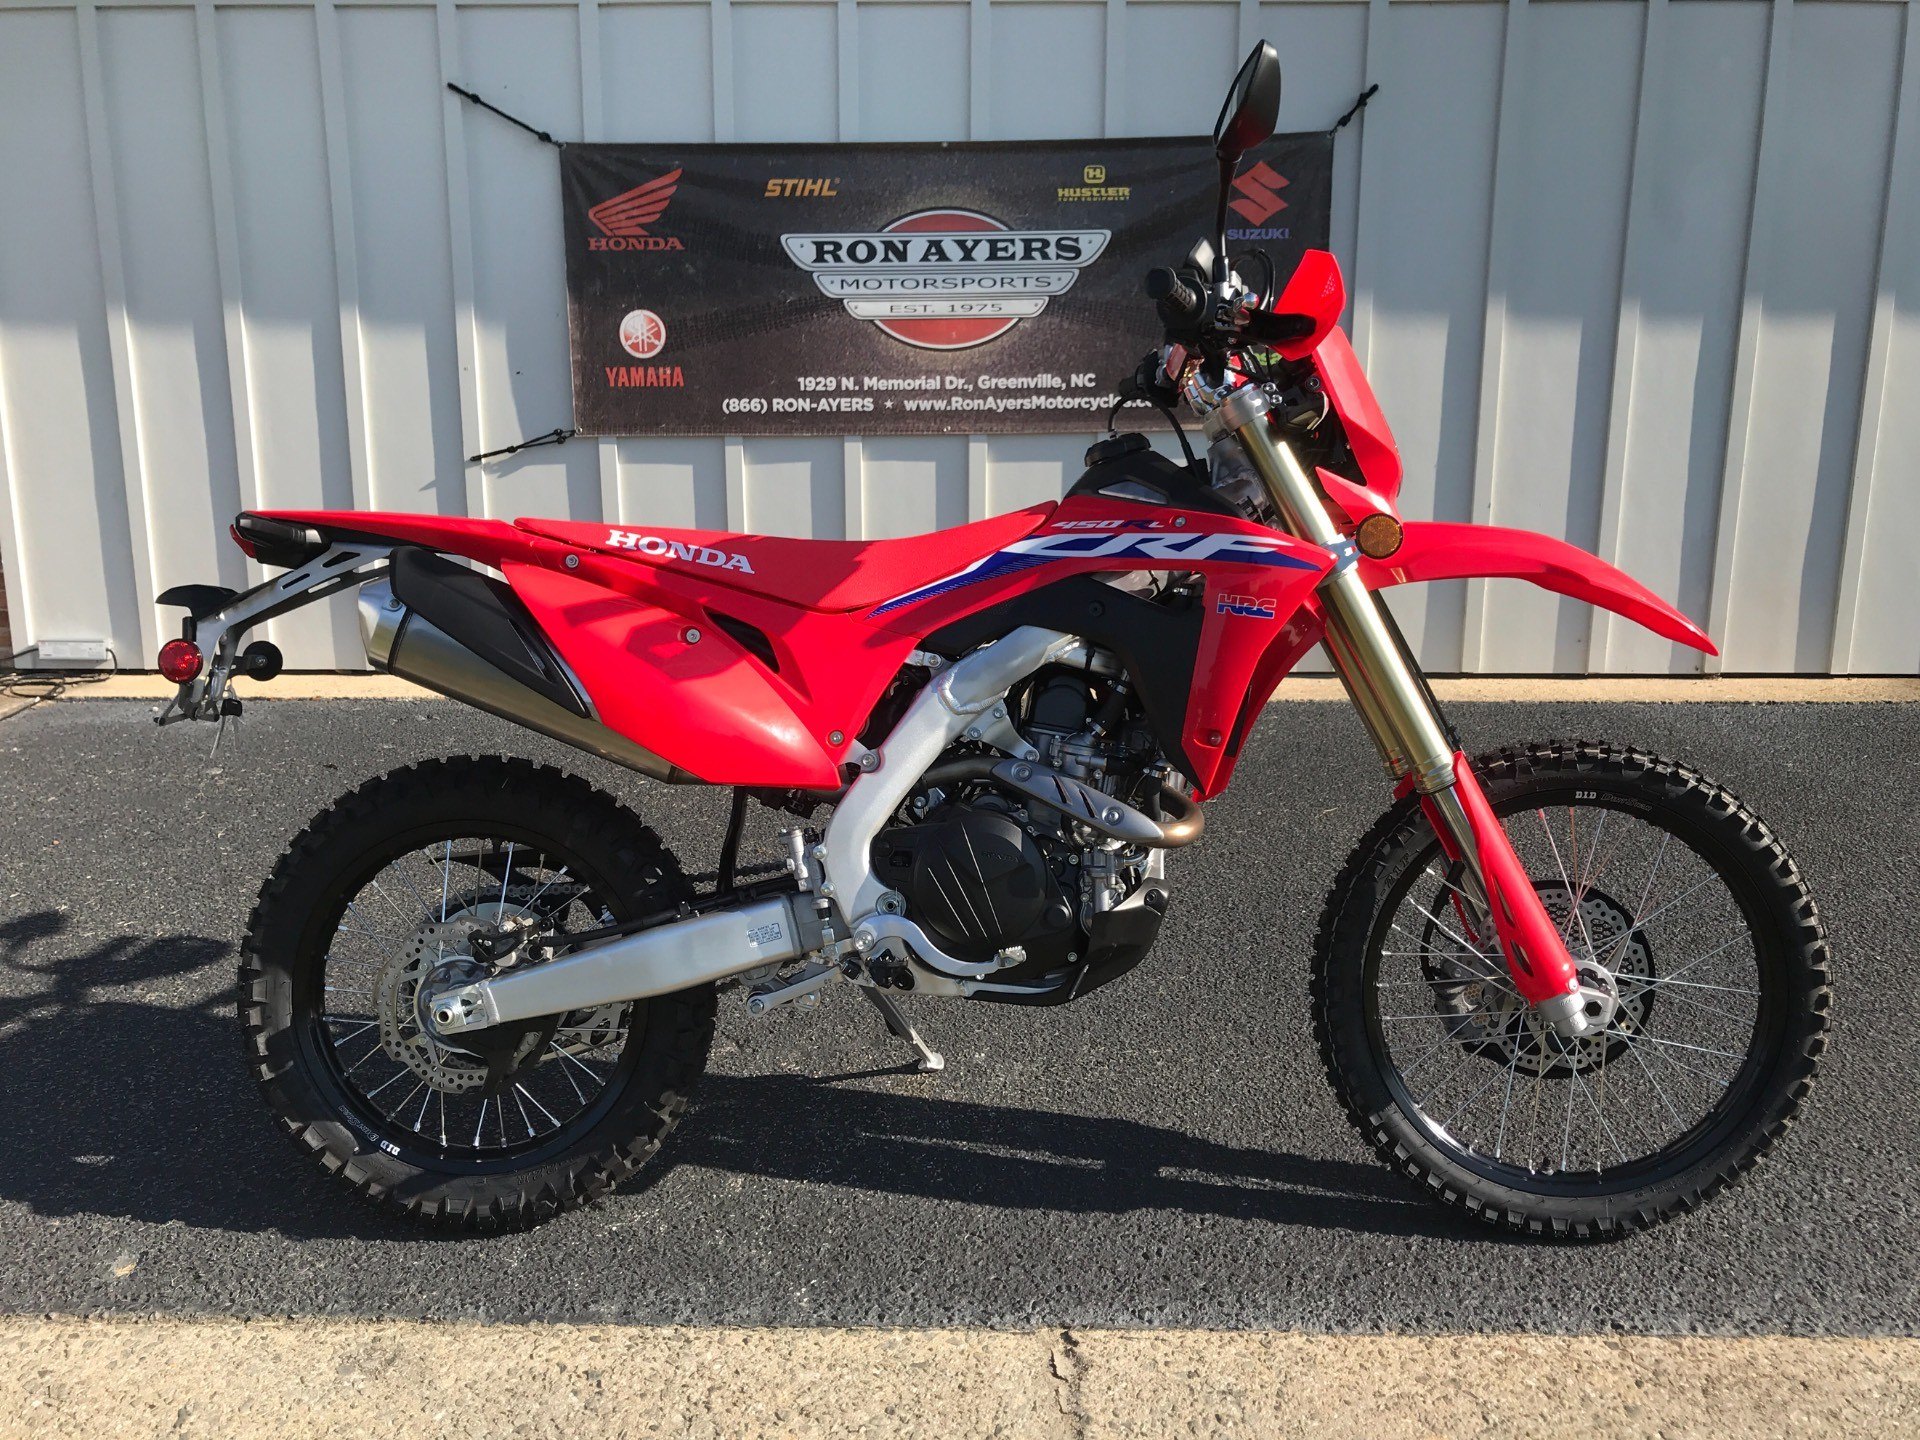 New 2021 Honda CRF450RL Motorcycles in Greenville, NC | Stock Number: N/A